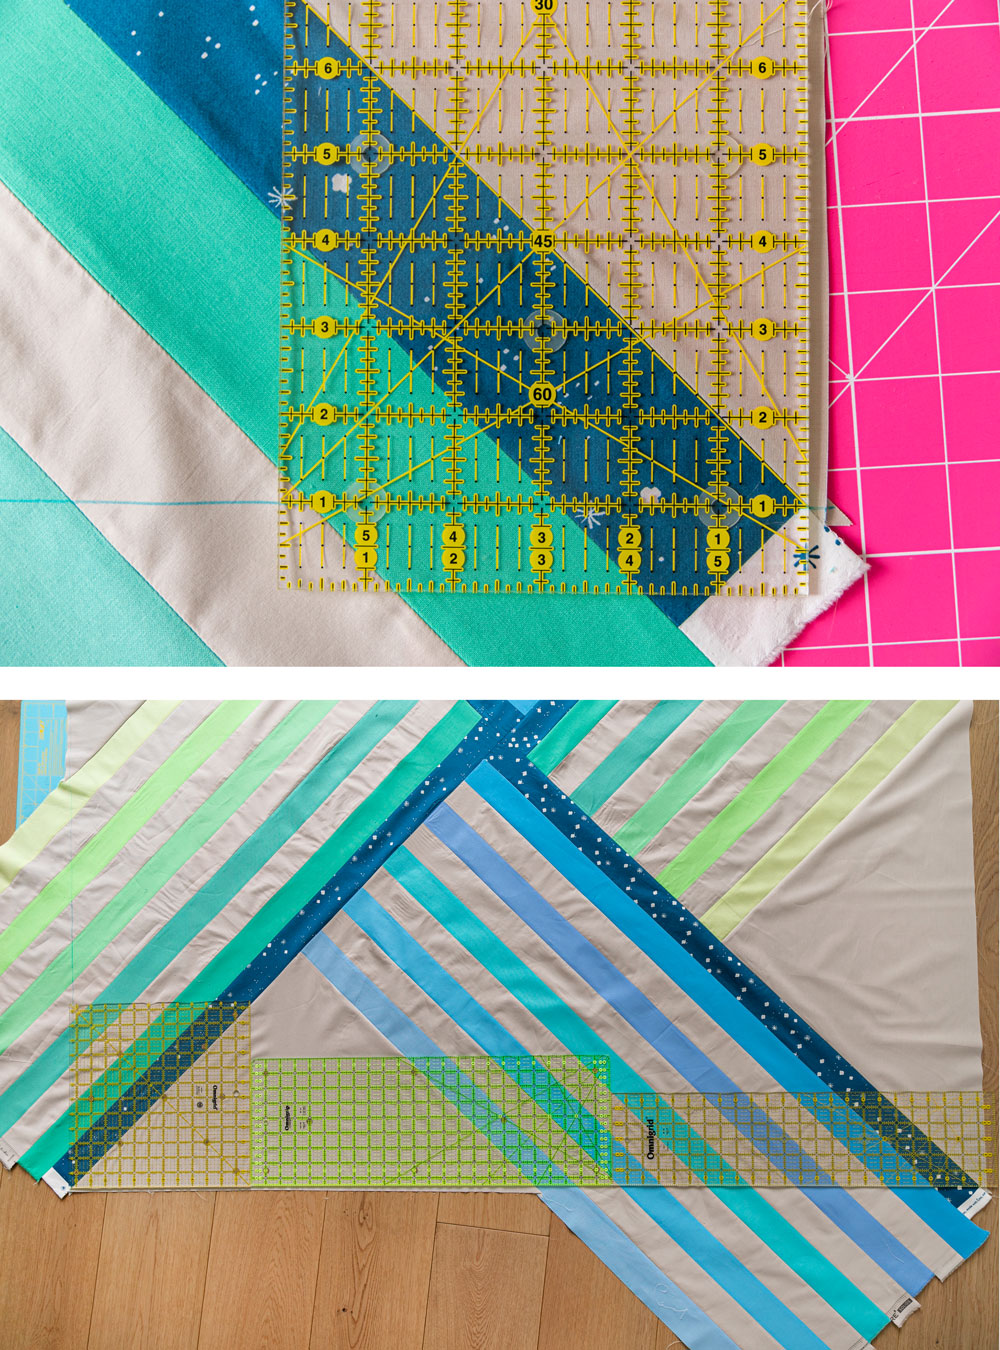 In the final week of the Adventureland quilt sew along we sew our four blocks together and trim the quilt top. Check out these helpful tips! suzyquilts.com